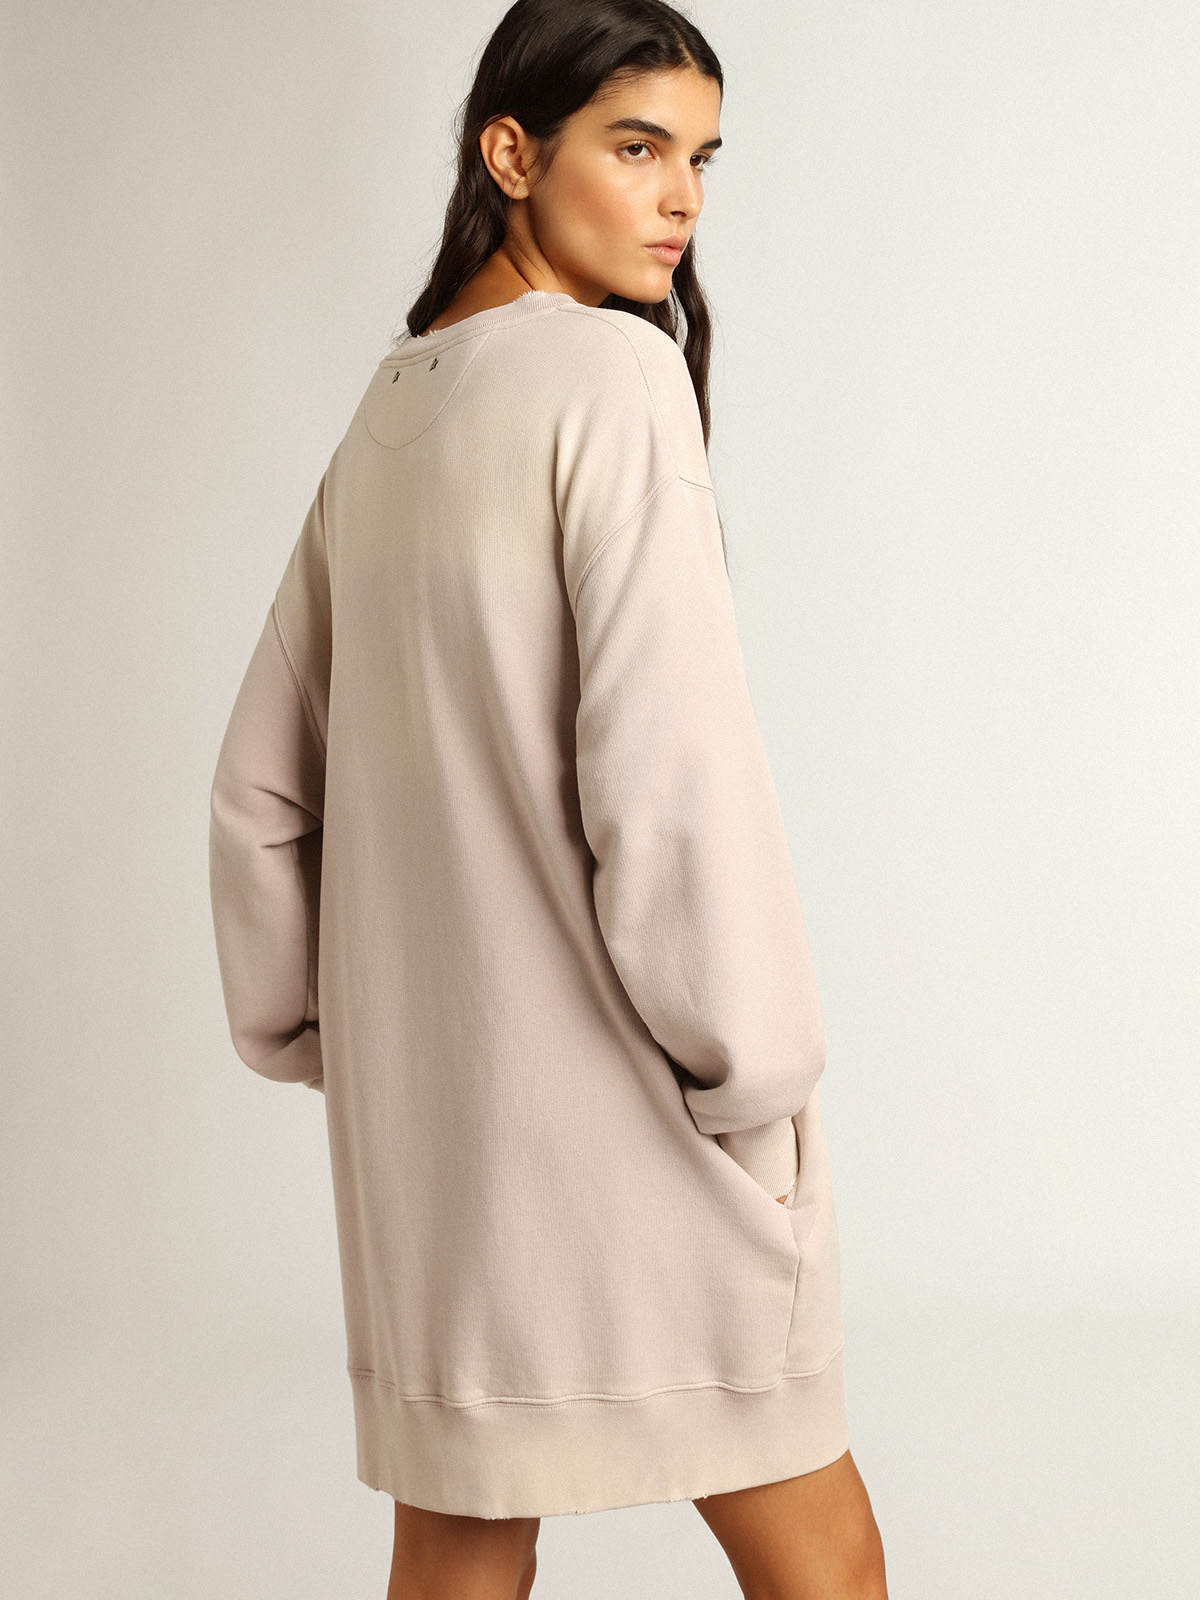 Wholesale oversized sweatshirt dress With Style And Elegance For Different  Occasions 